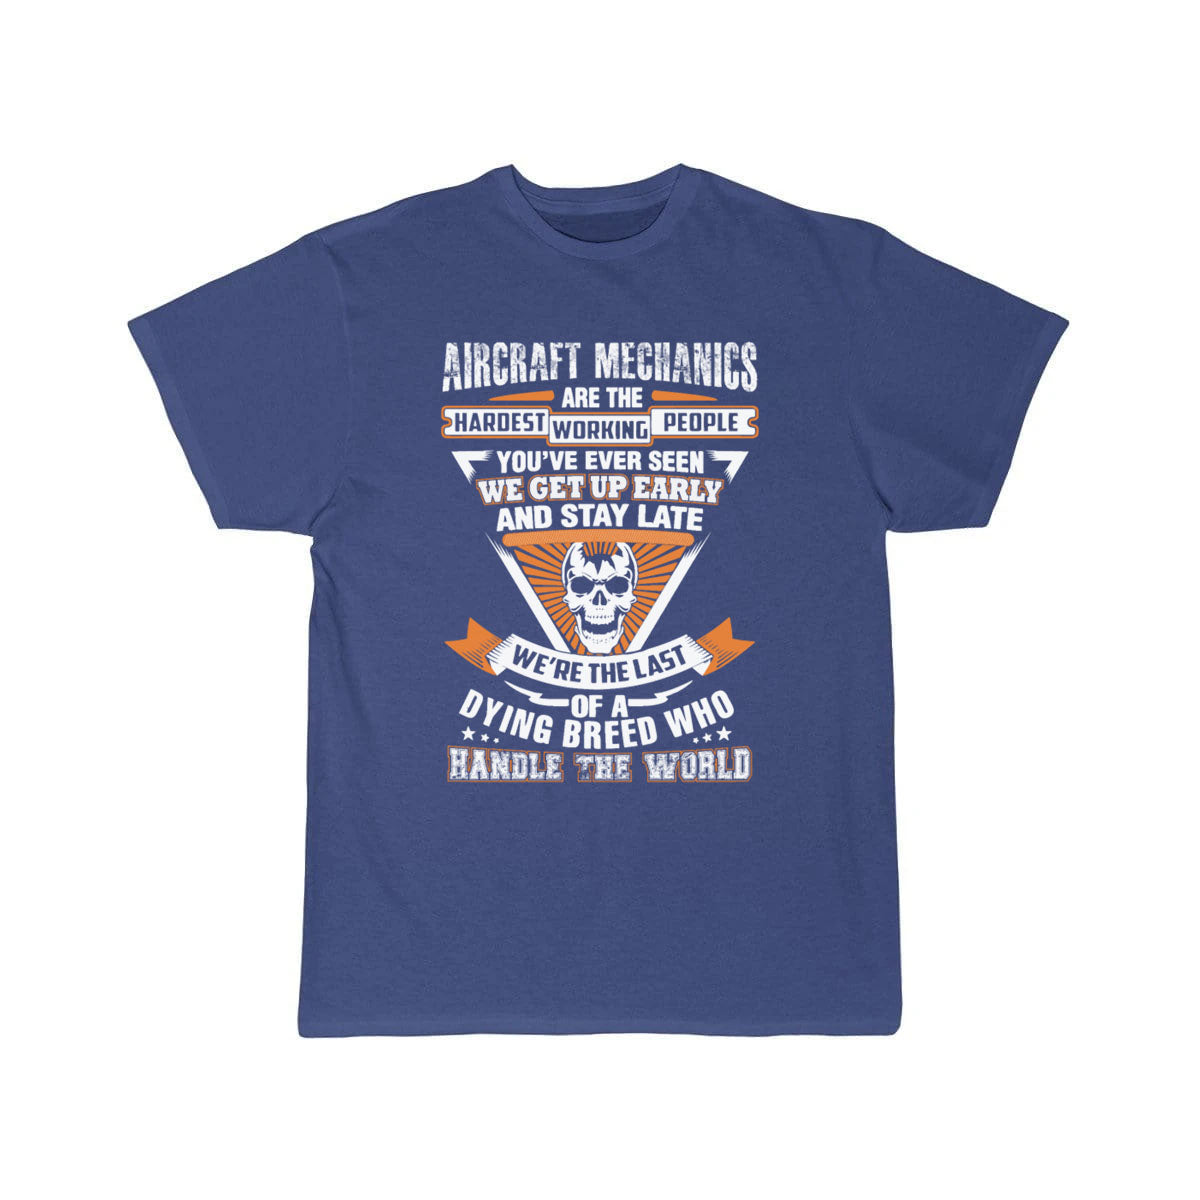 Aircraft mechanics - The last of a dying breed  T SHIRT THE AV8R